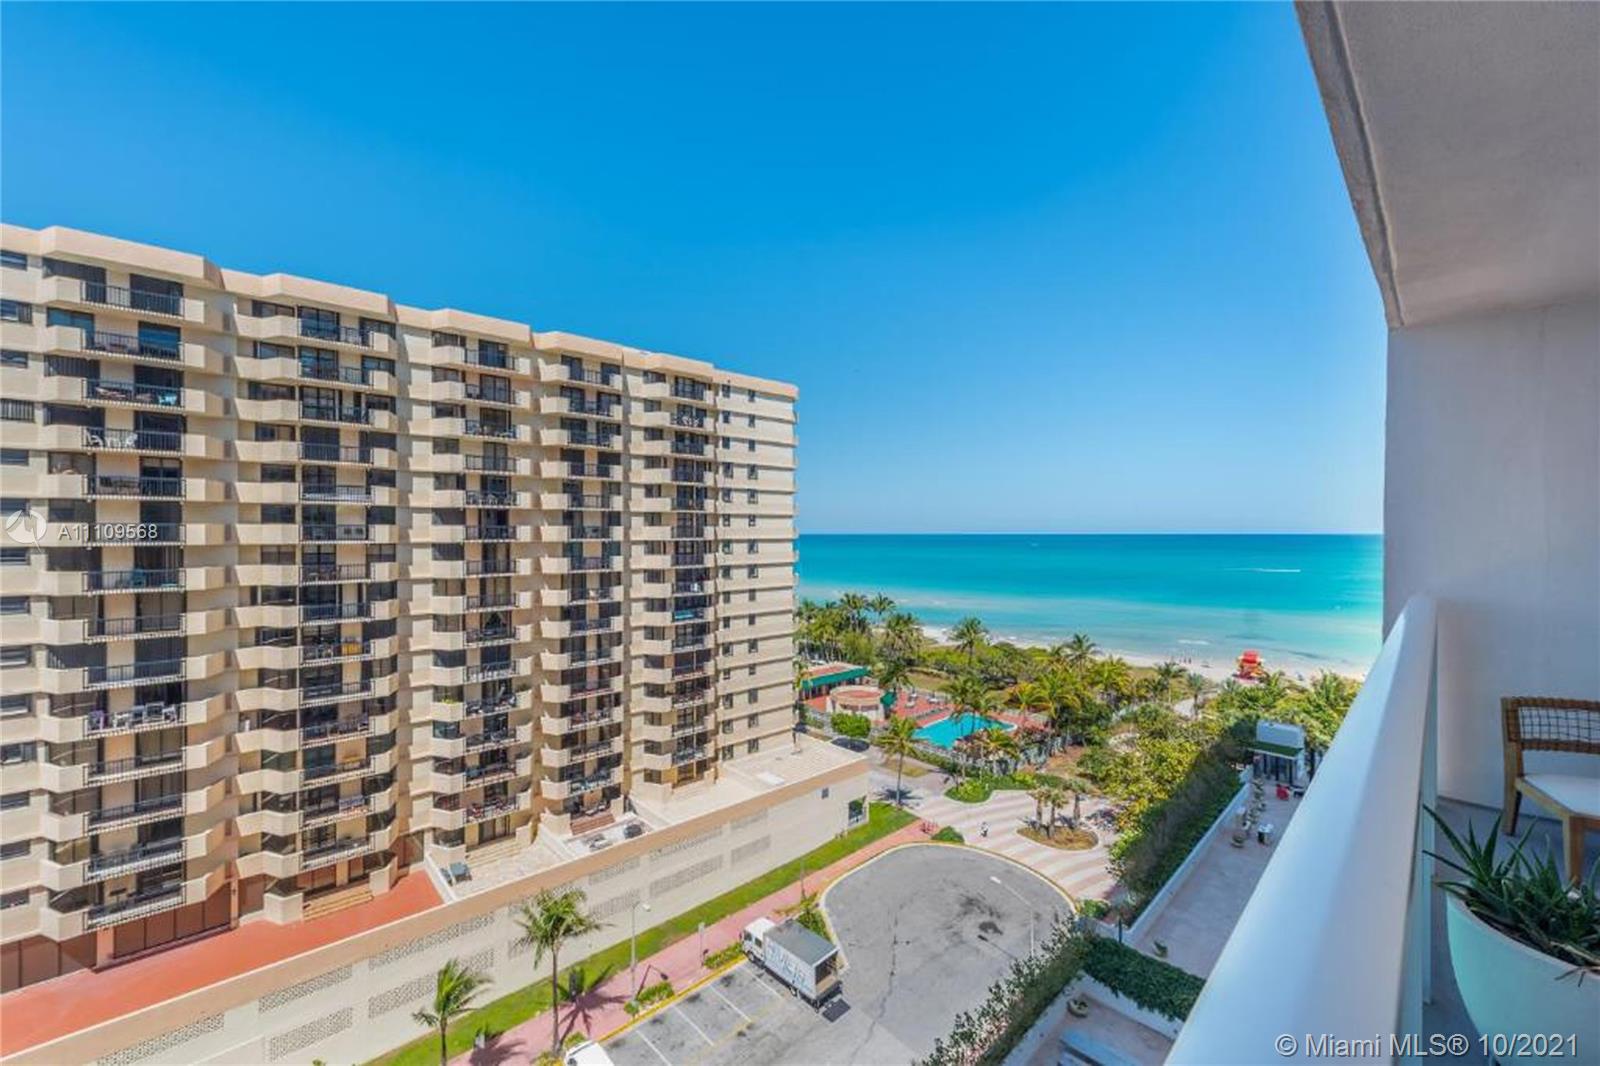 Beautifully finished and furnished, 890 square feet 1 bed/1.5 bath at the new 1 Hotel + Homes. Highly desirable 07 line w/wide open ocean views. Great amenities including 4 pools, valet, private owner's lobby separate from hotel entrance and the best restaurants in South Beach